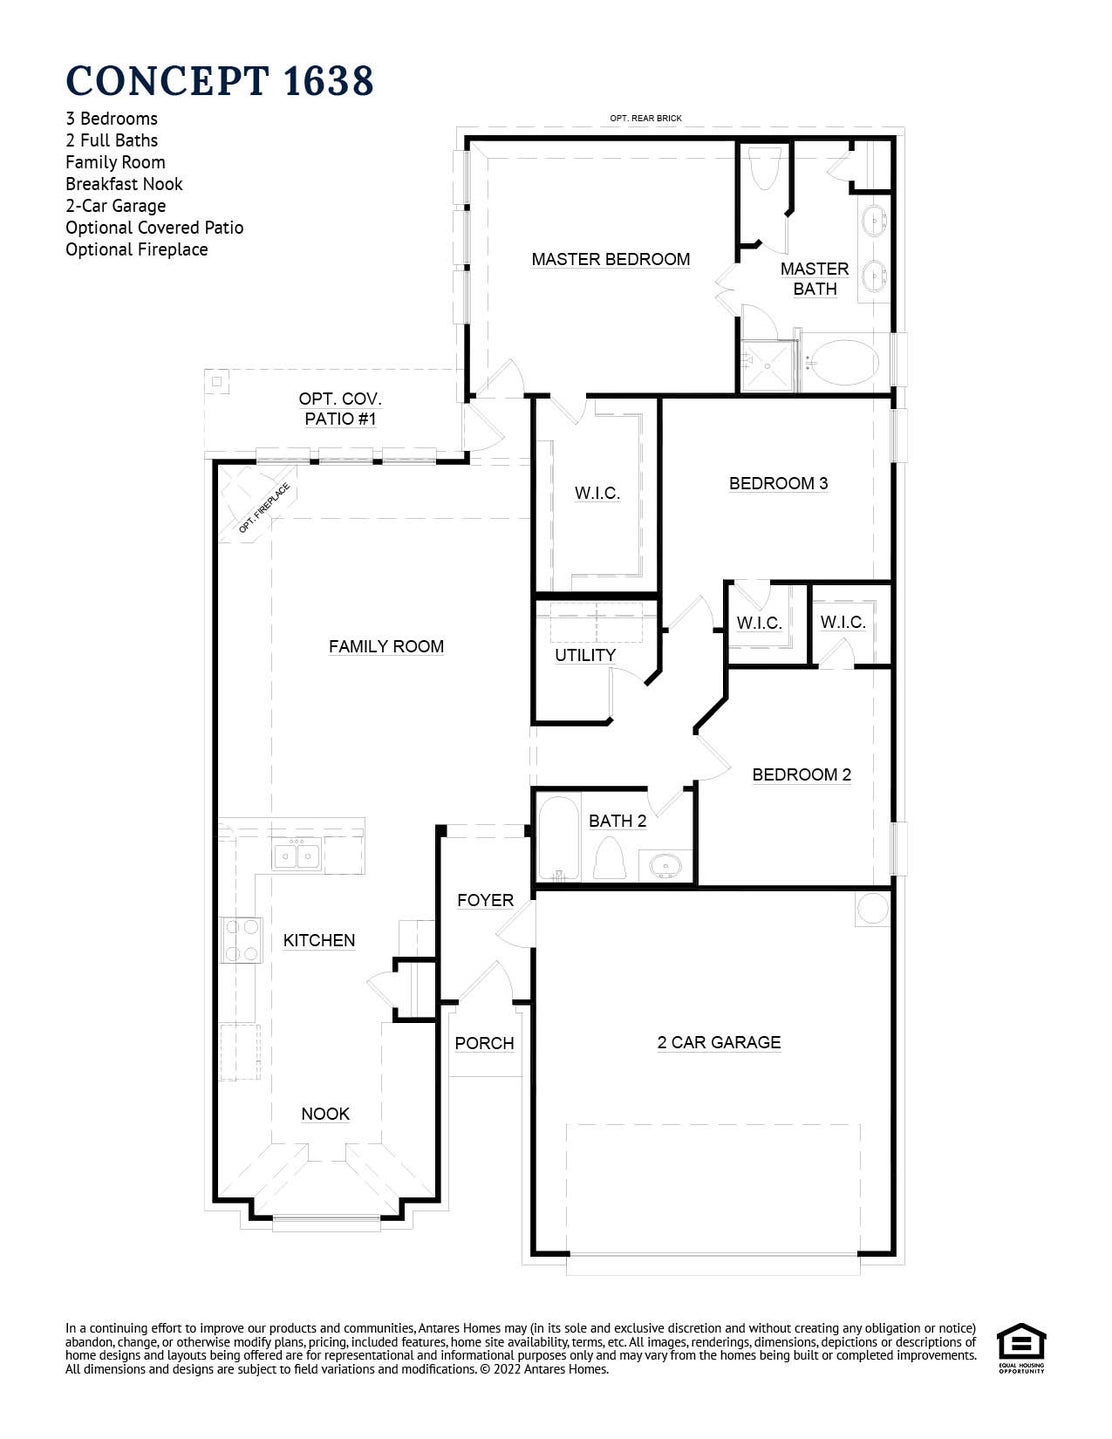 1,648sf New Home in Fort Worth, TX